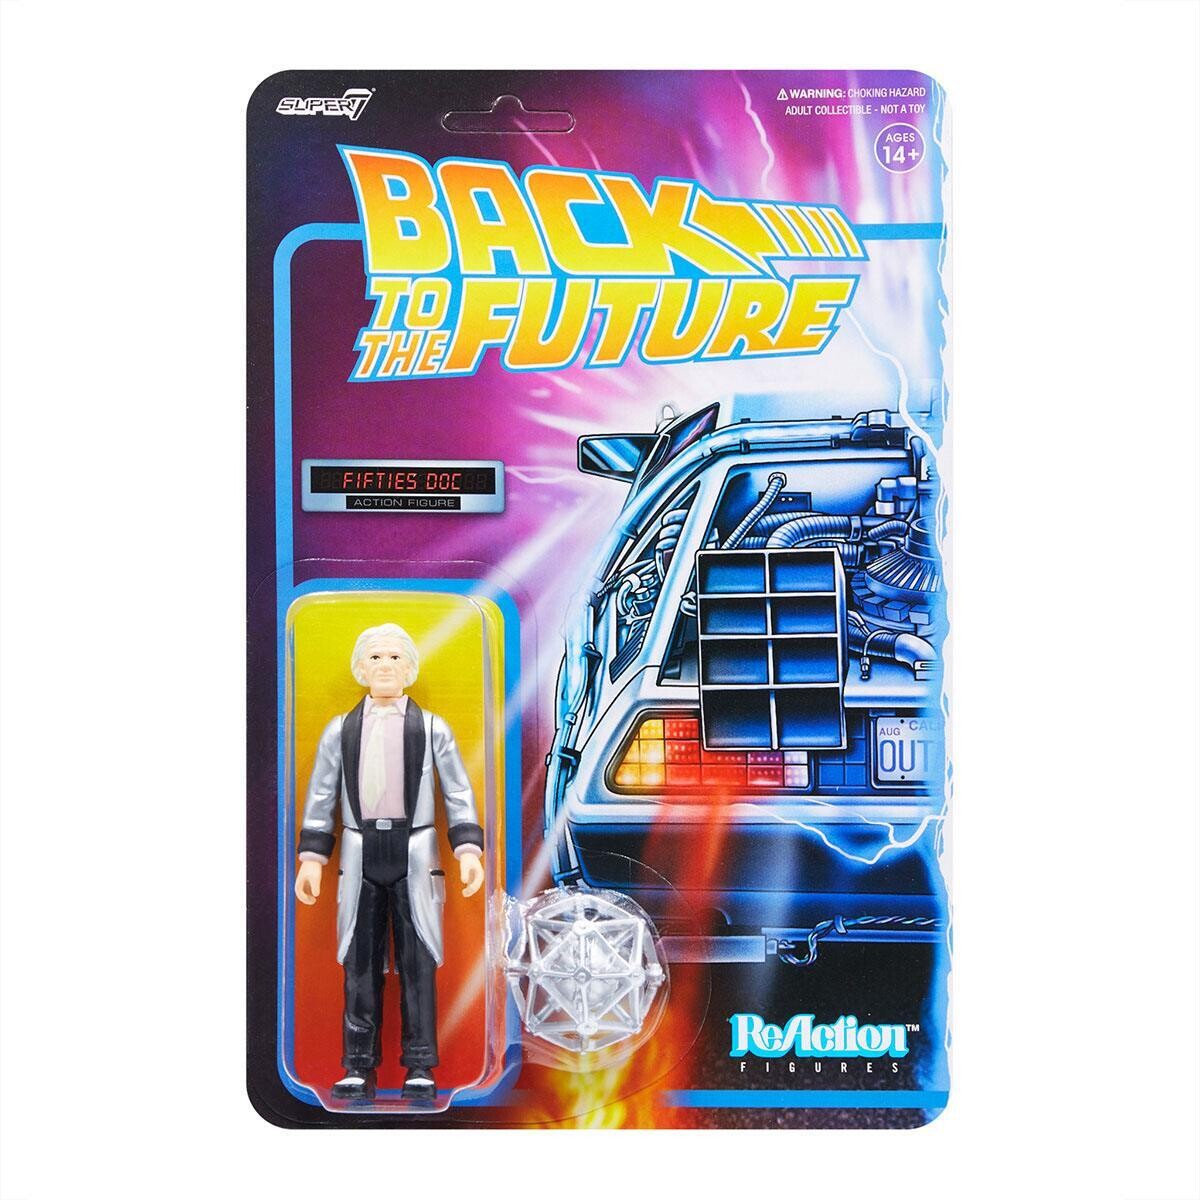 ReAction Action Back To The Future ReAction Action Figure Fifties Doc 10 cm